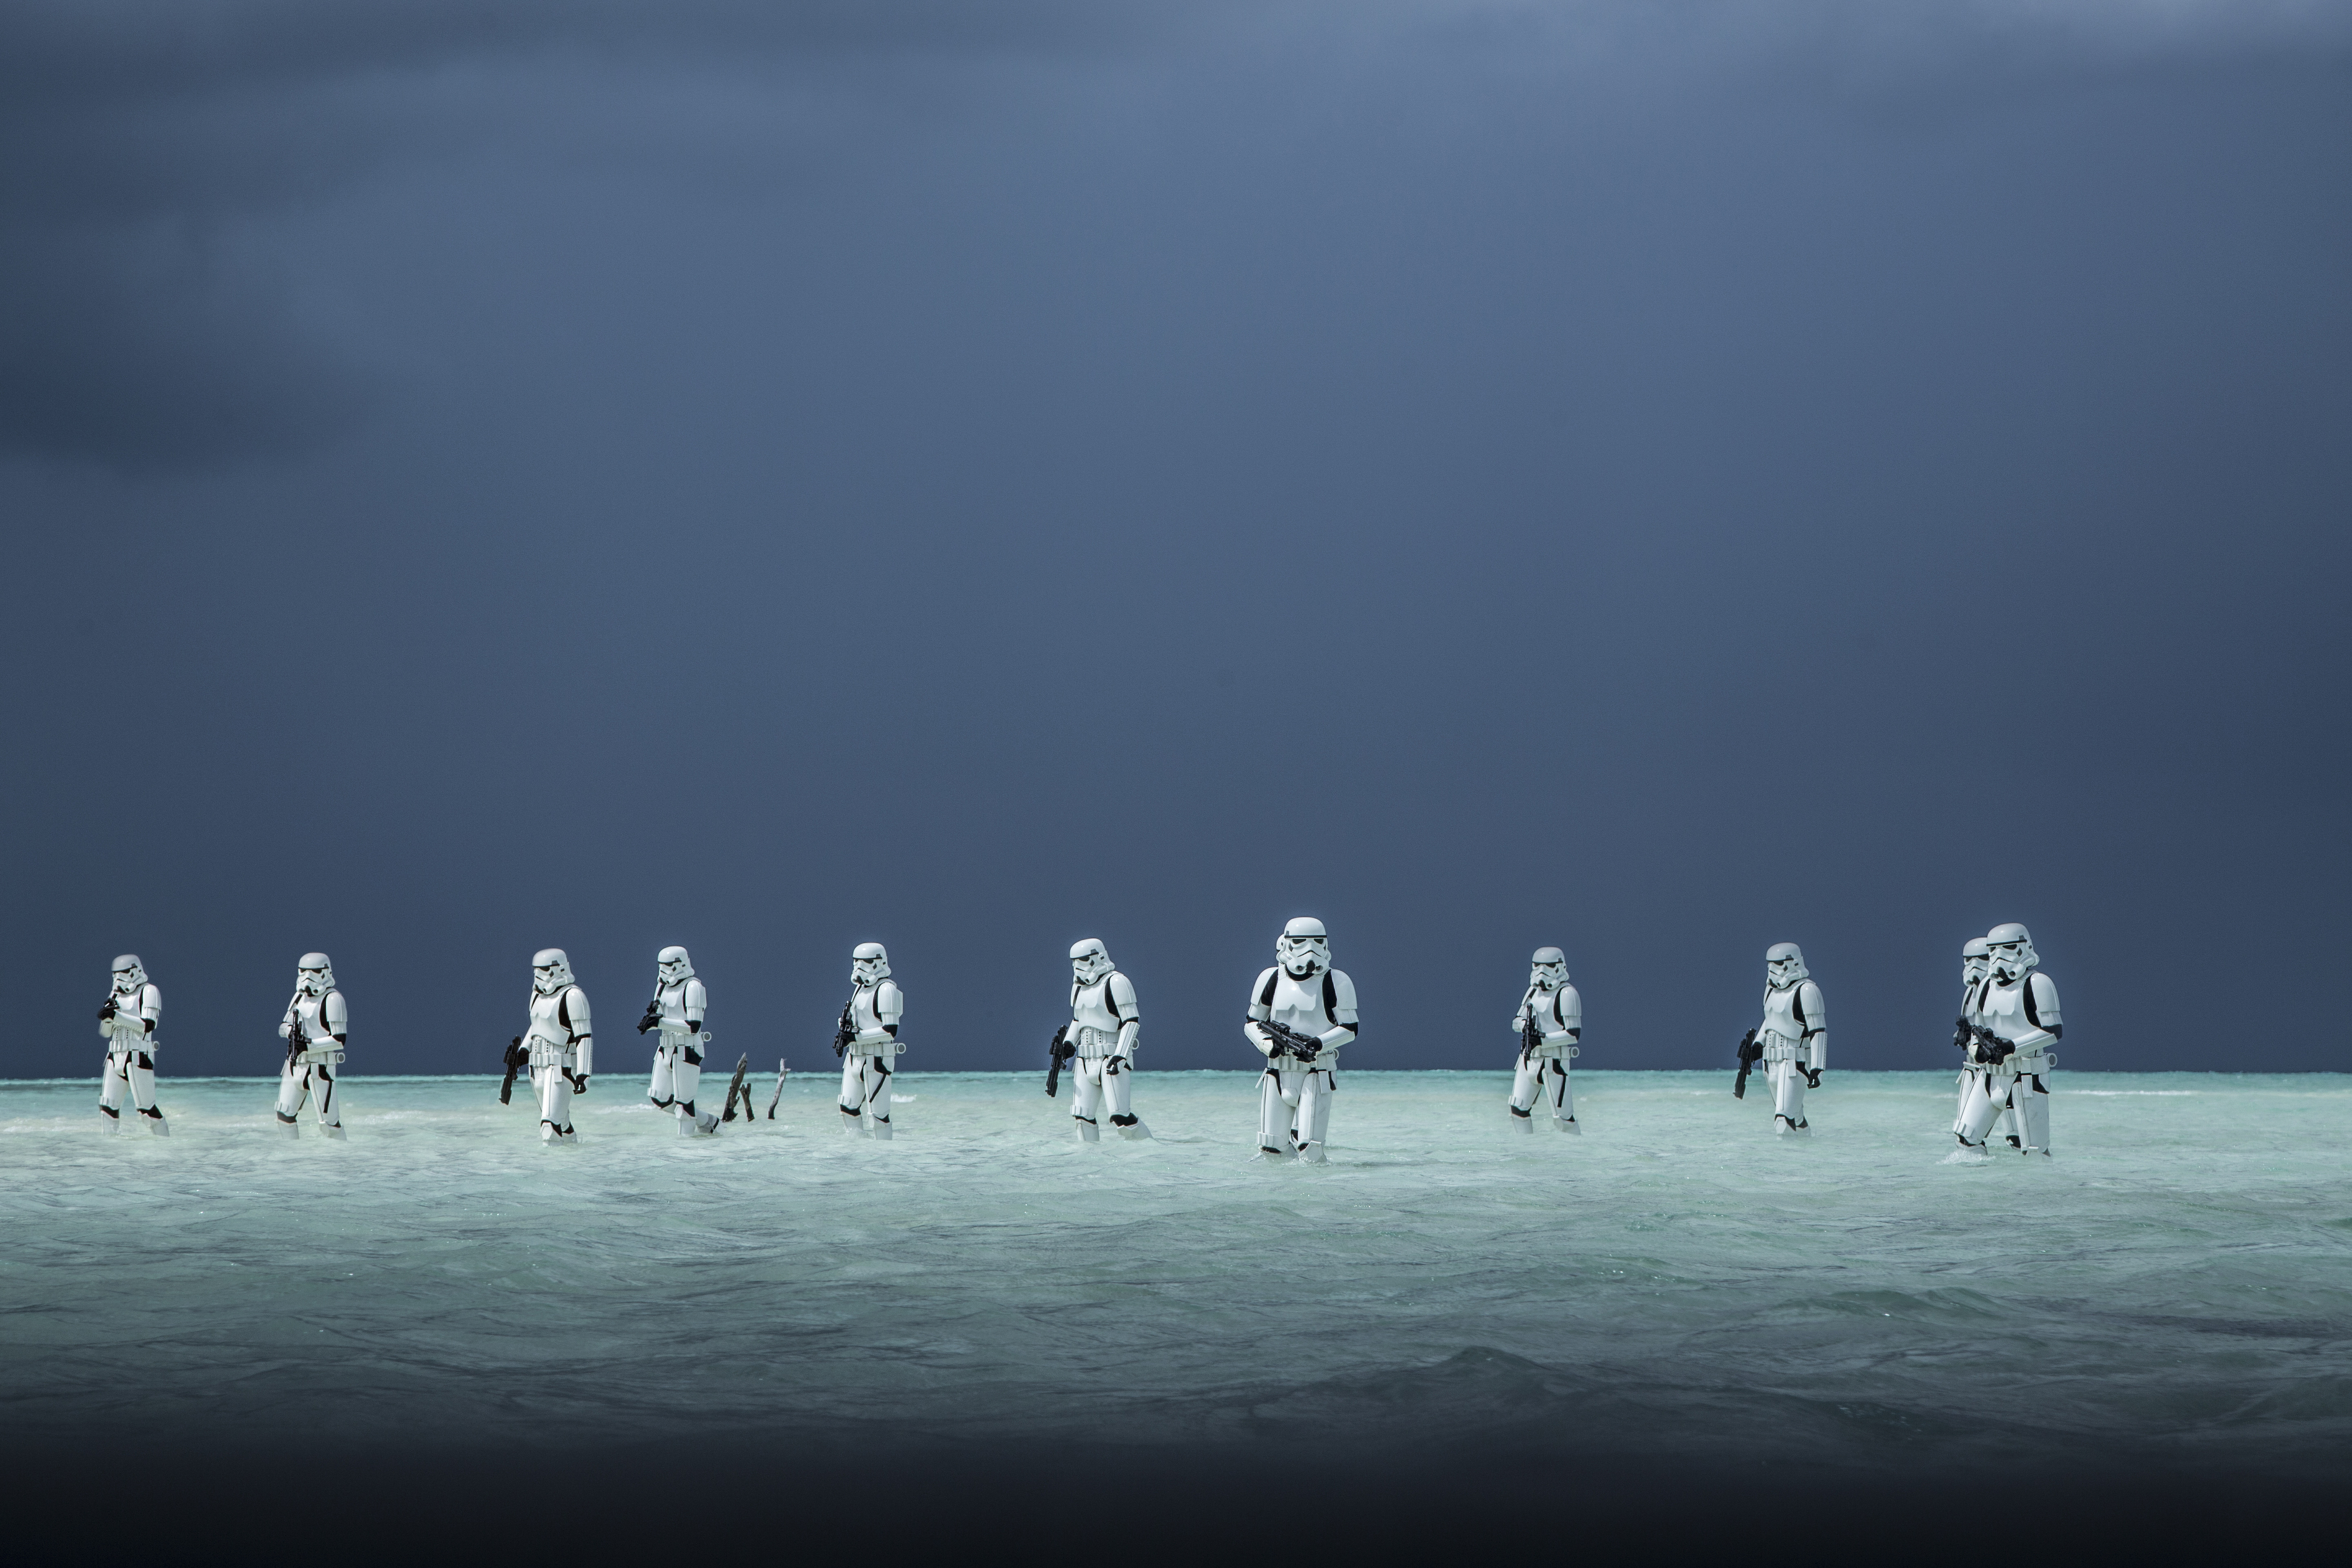 Rogue One: A Star Wars Story  Stormtroopers  Ph: Jonathan Olley  ©Lucasfilm LFL 2016.